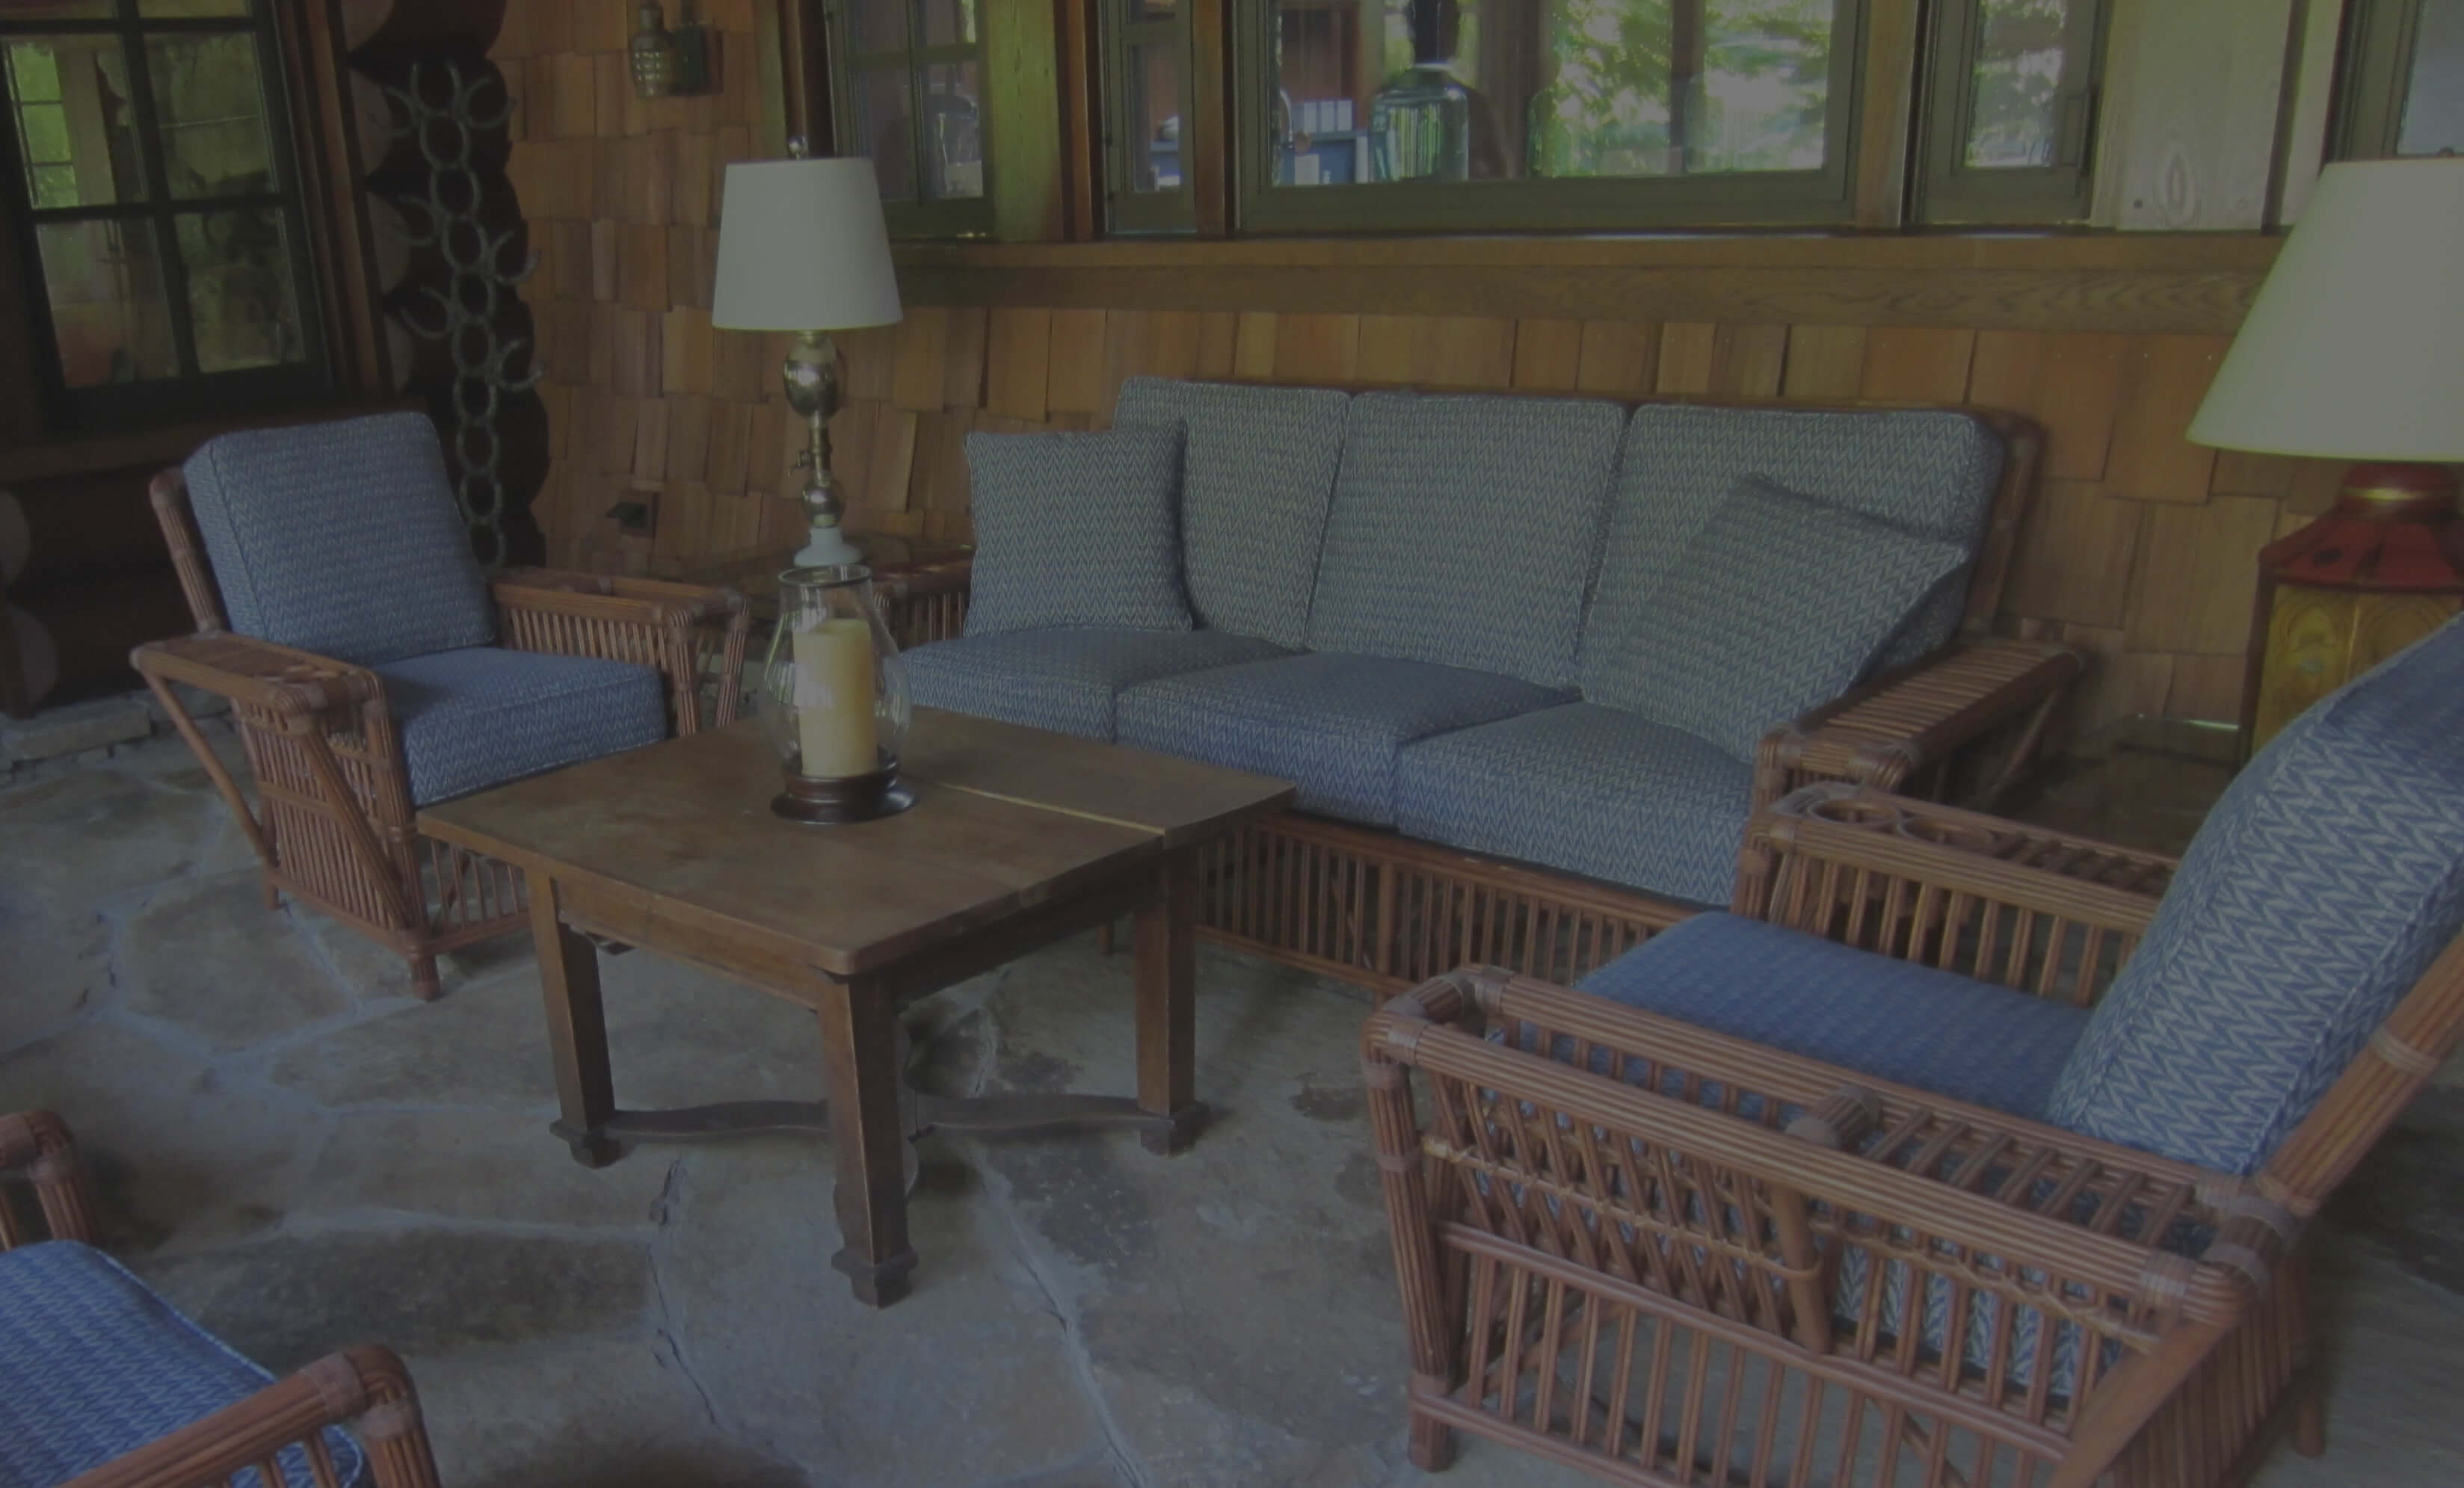 New cushions for outdoor furniture set in Squam Lake